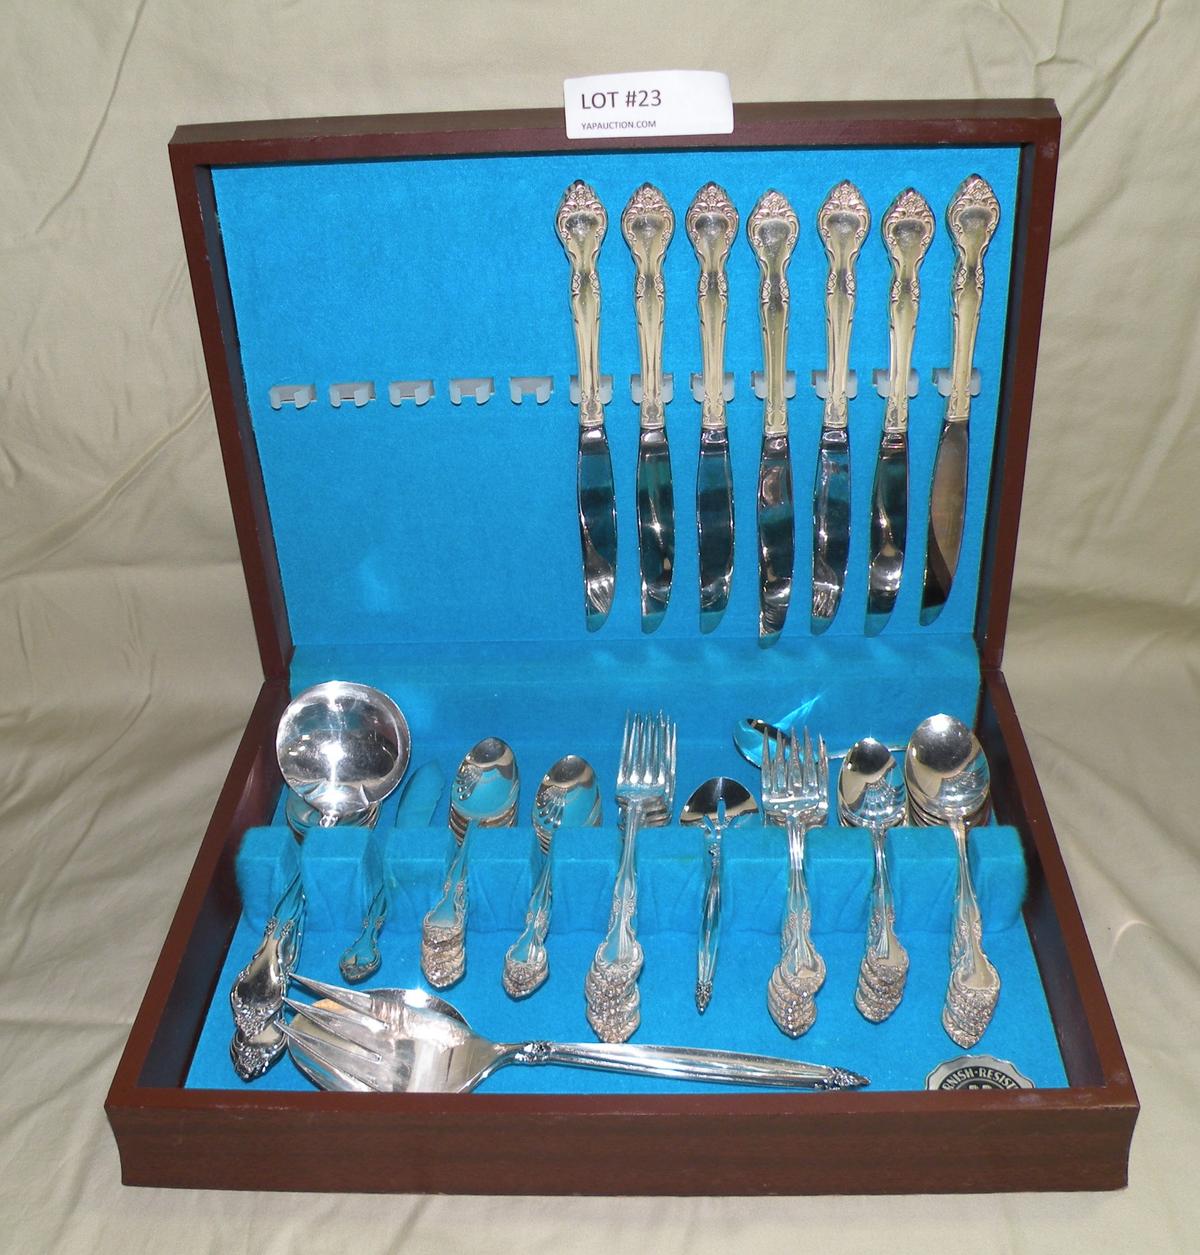 ASSORTED SILVER PLATE SILVERWARE IN LINED WOOD CASE